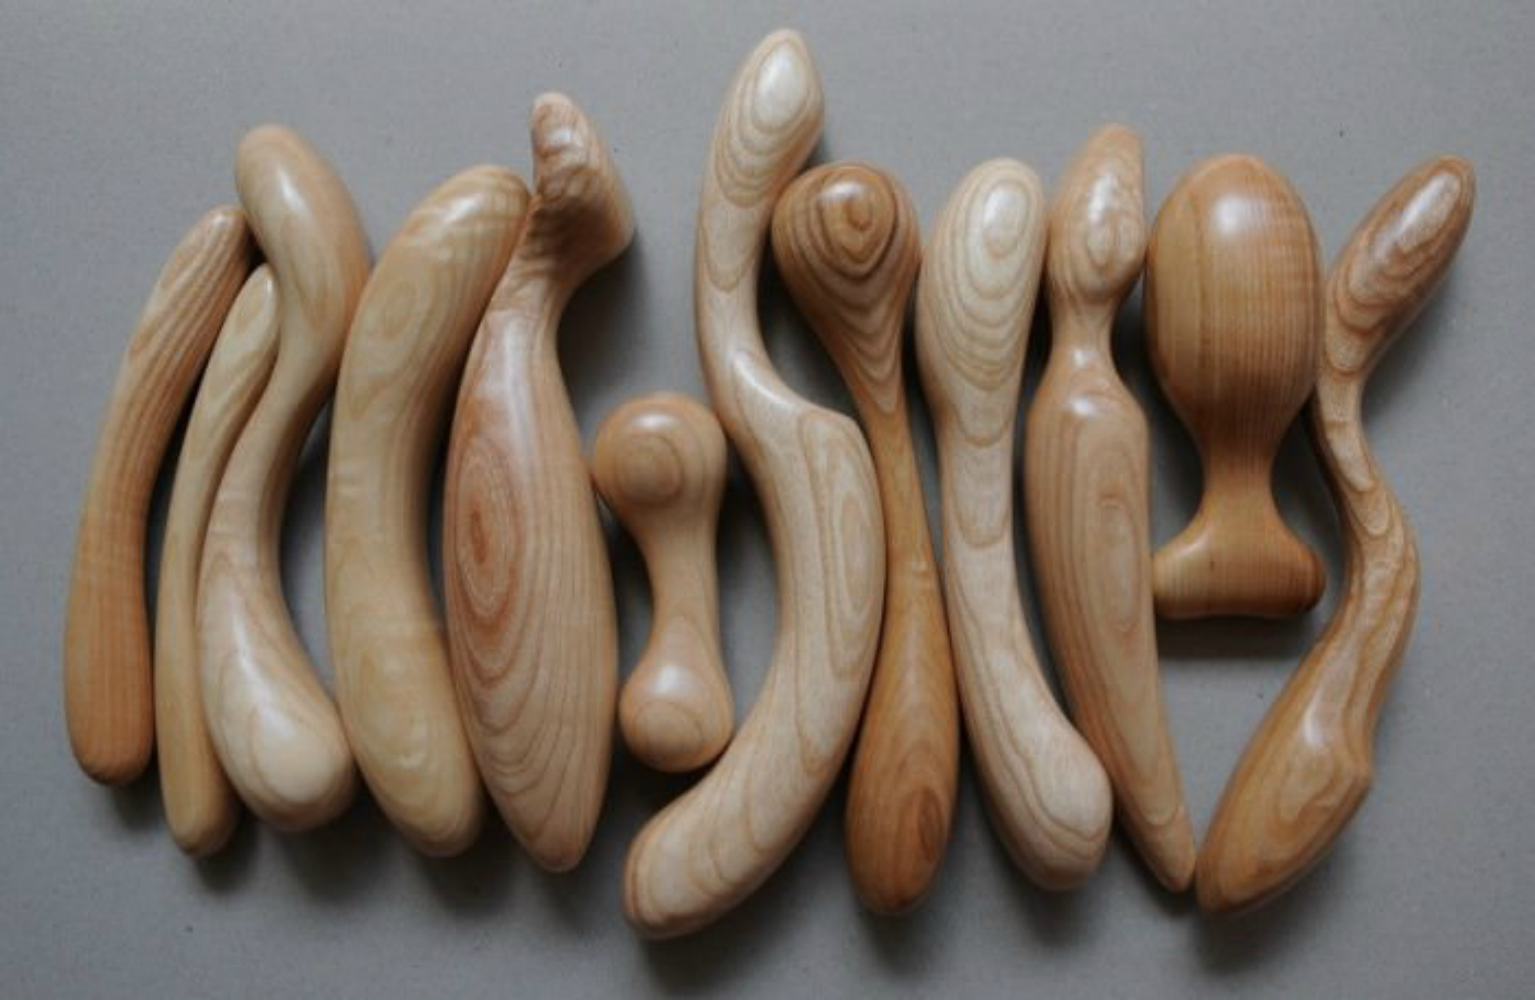 Wooden dildoes